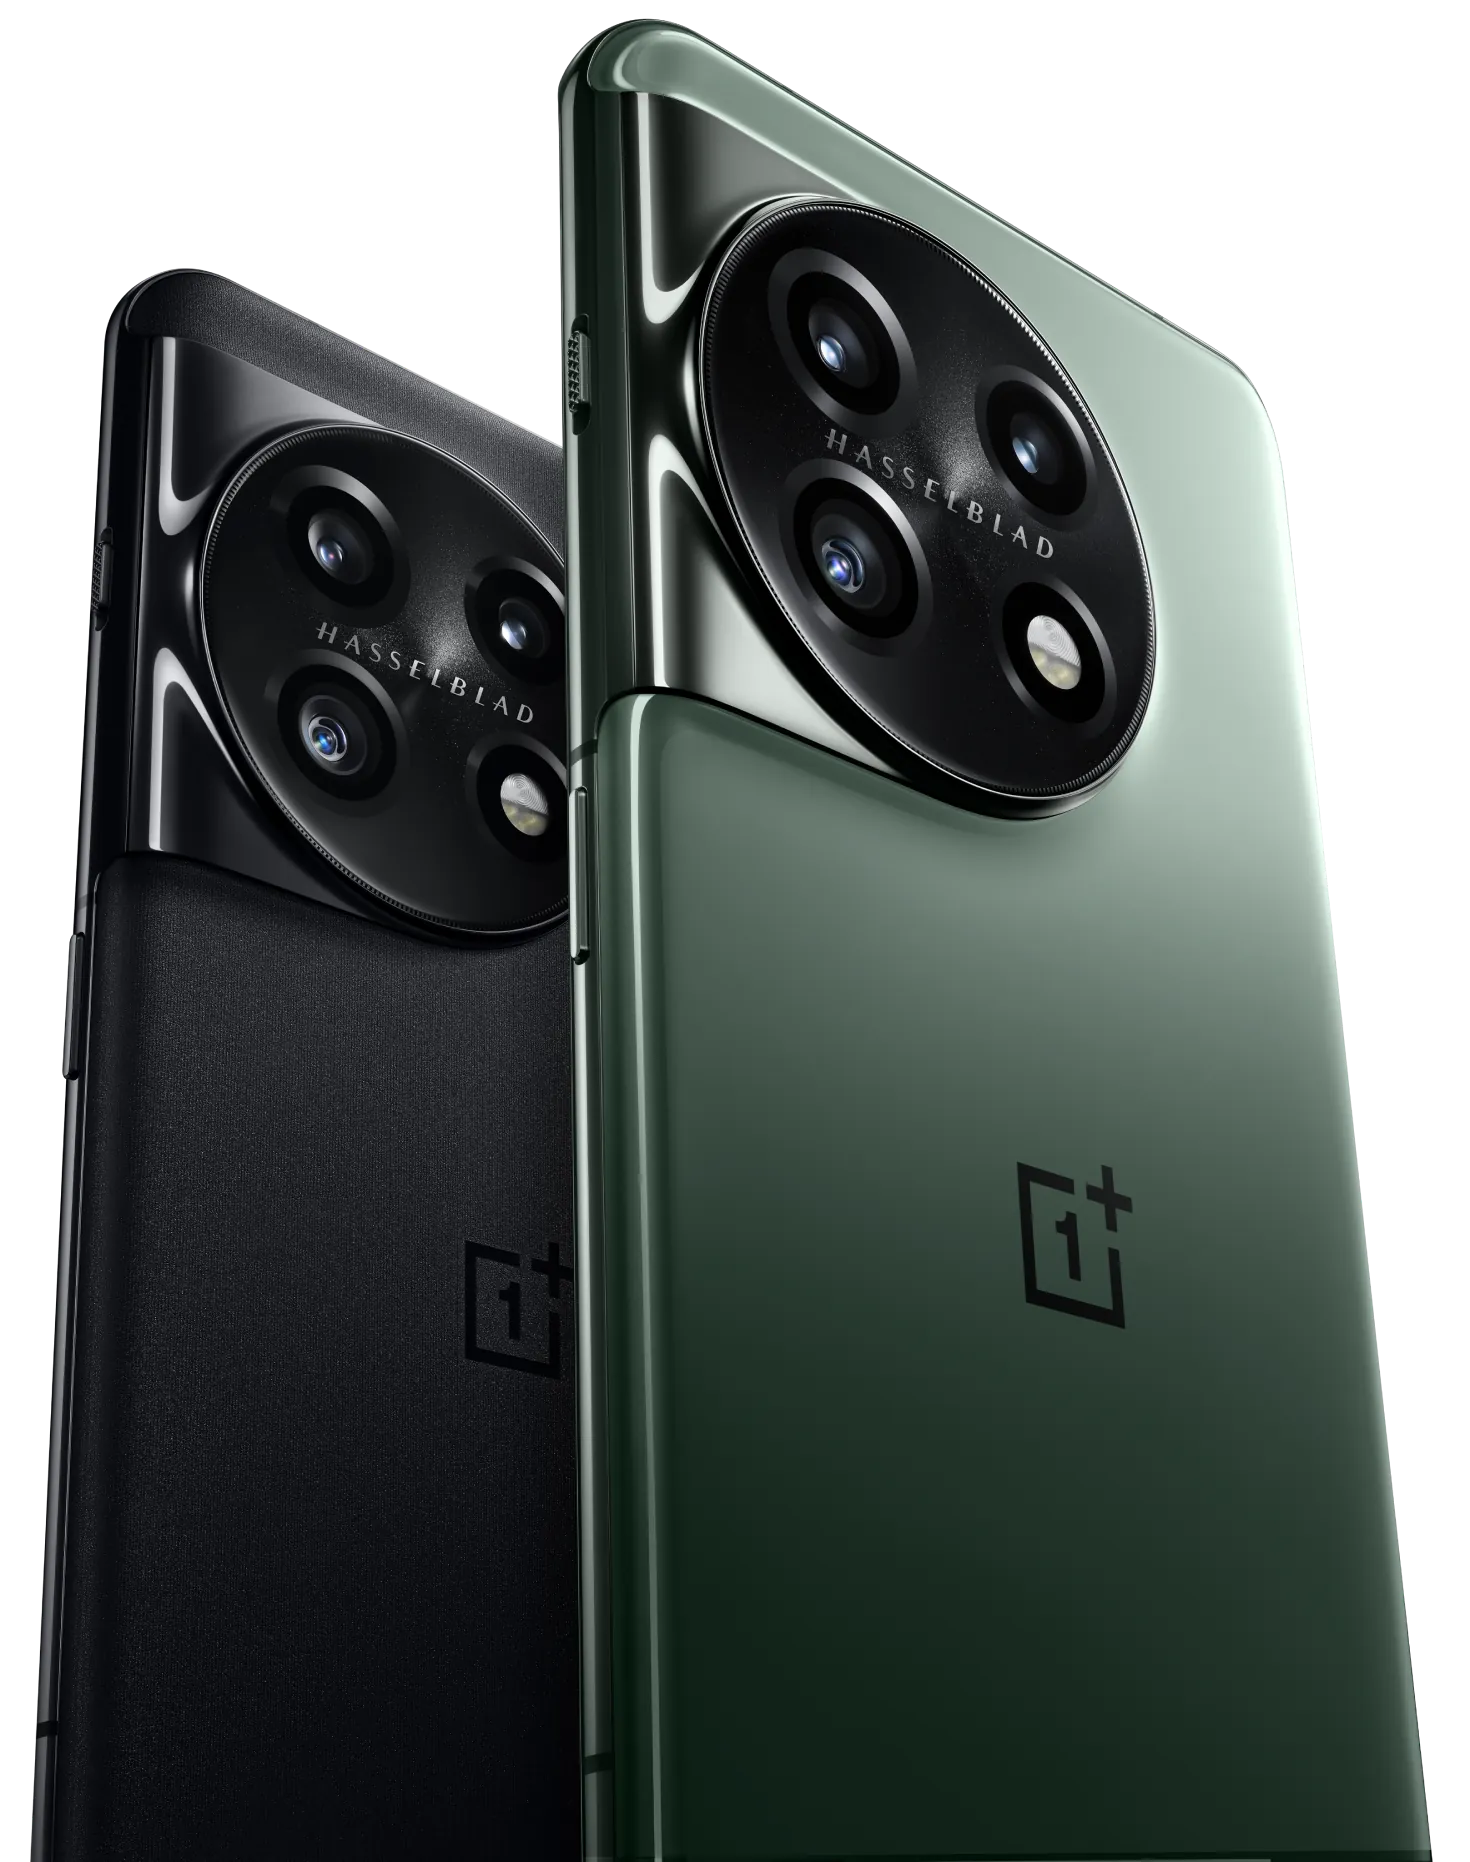 OnePlus 10 Pro will launch in North America, Europe and India on March 31st